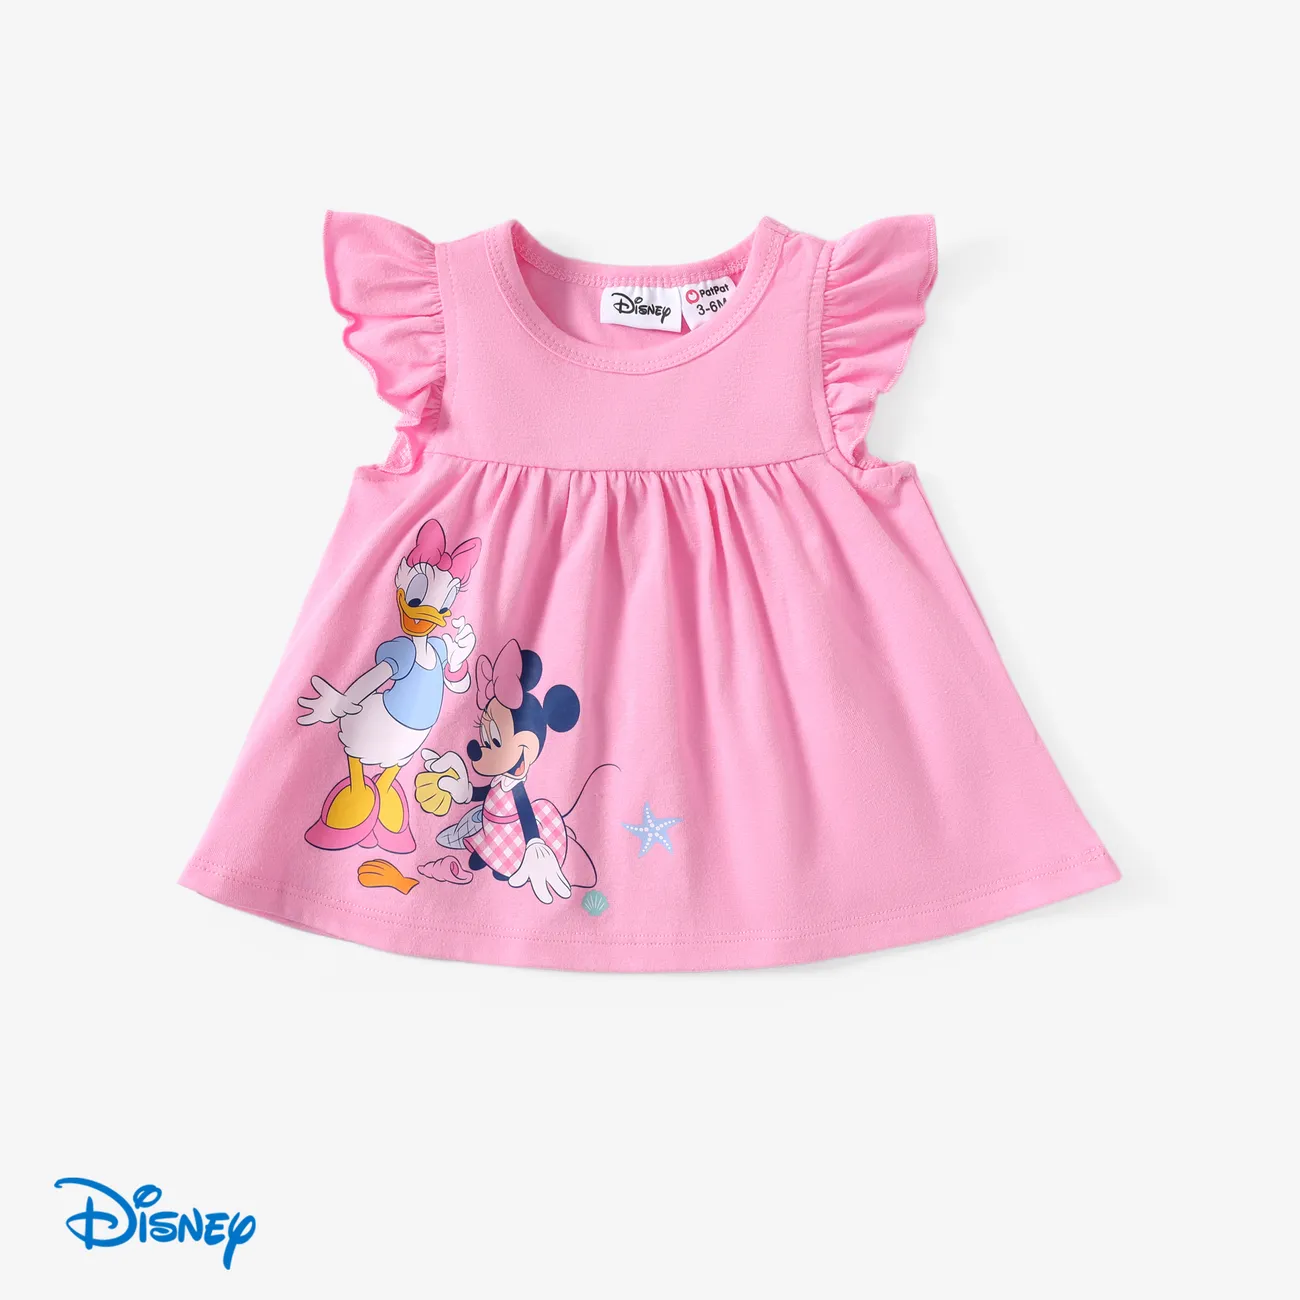 Disney Mickey and Friends Baby/Toddler Girls 2pcs Cotton Character Print Ruffled-sleeve Top with Checked Shorts Set Pink big image 1